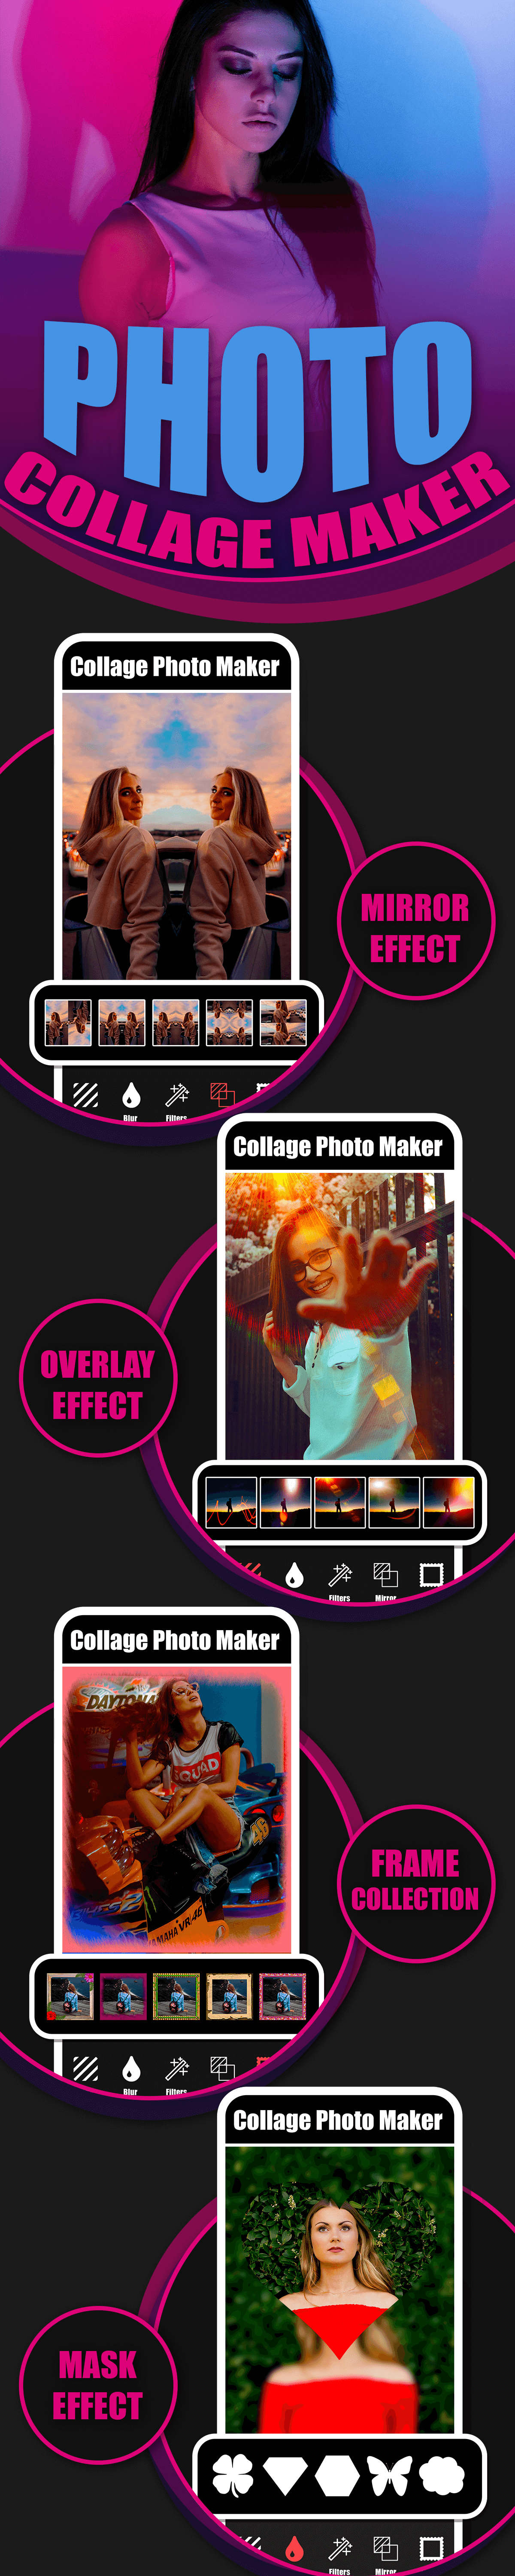 New Photo Collage Editor & Collage Pro Android App with Admob Ads Full Code, Guide - 1